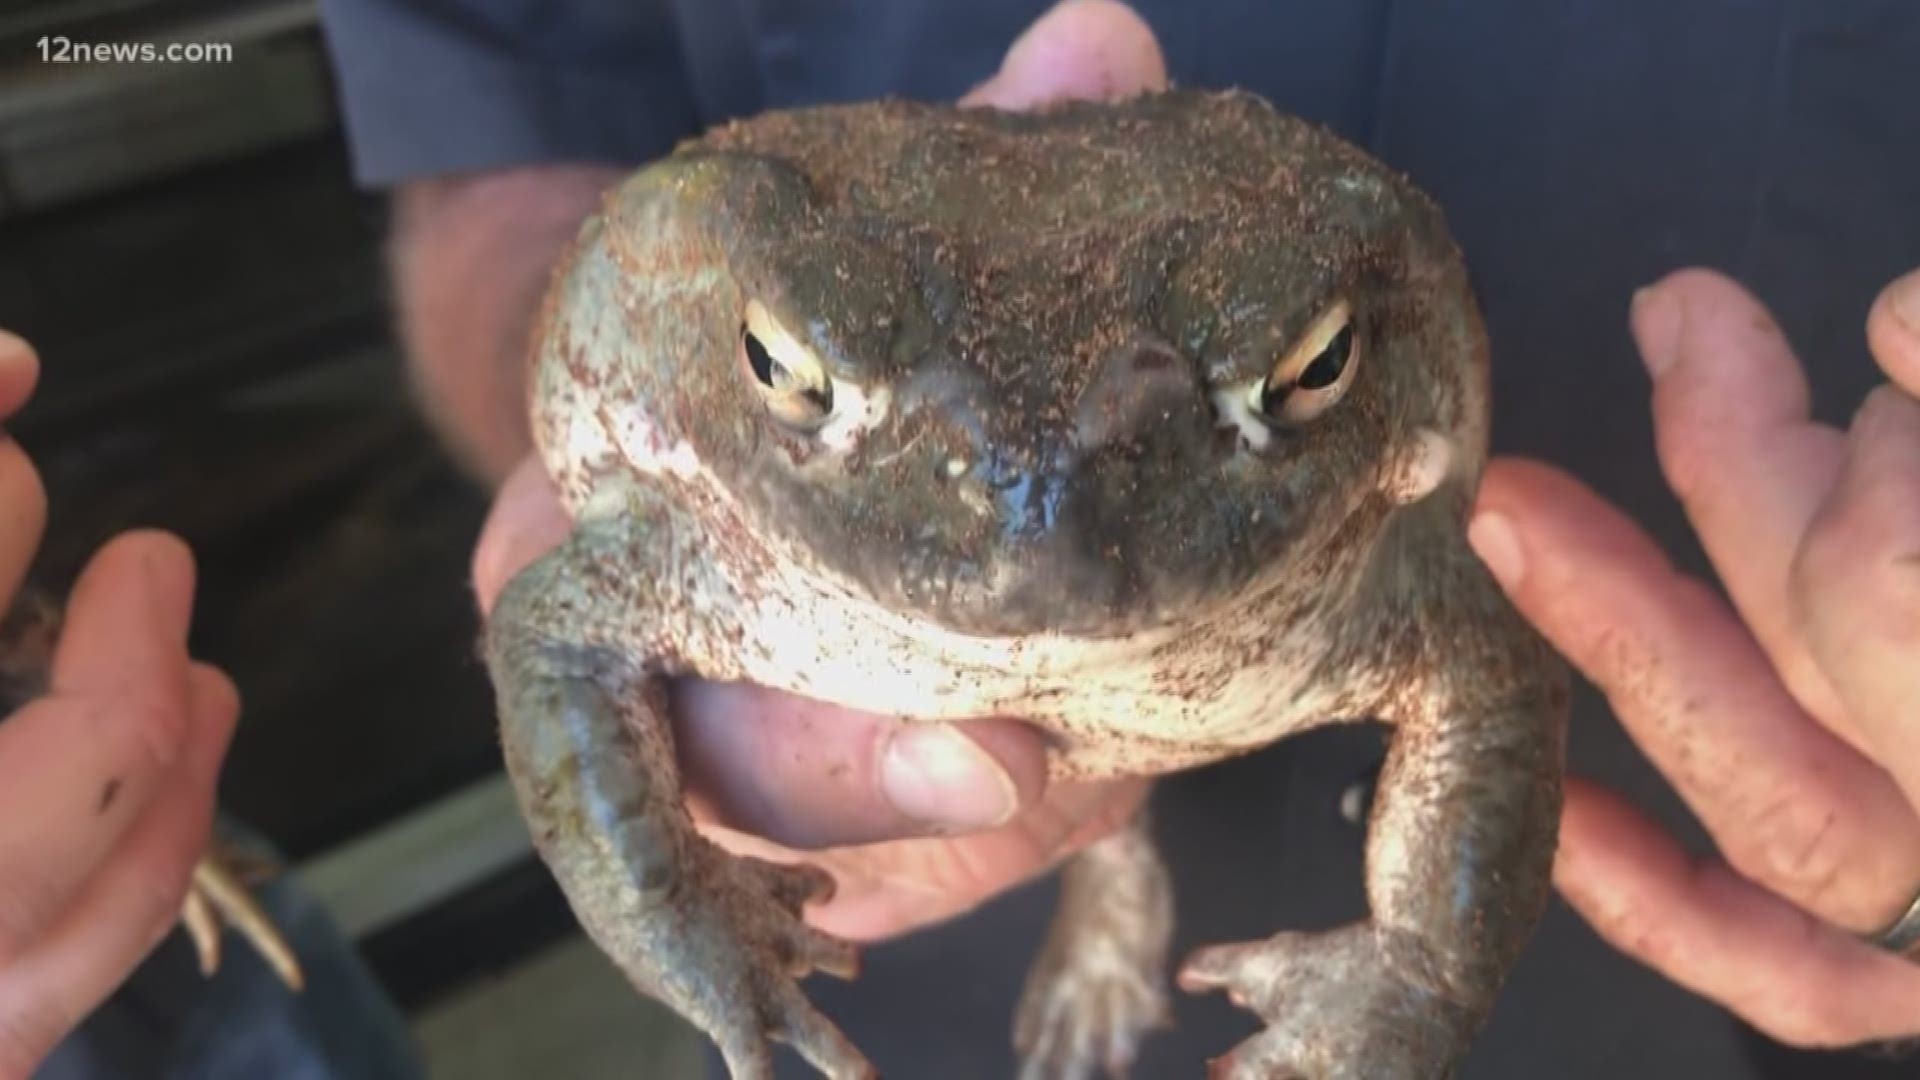 The monsoon rain is bringing more than relief to Arizona, it's also bringing out the Sonoran Desert toads. Here are some tips to keep your pets safe around the cold-blooded hoppers.